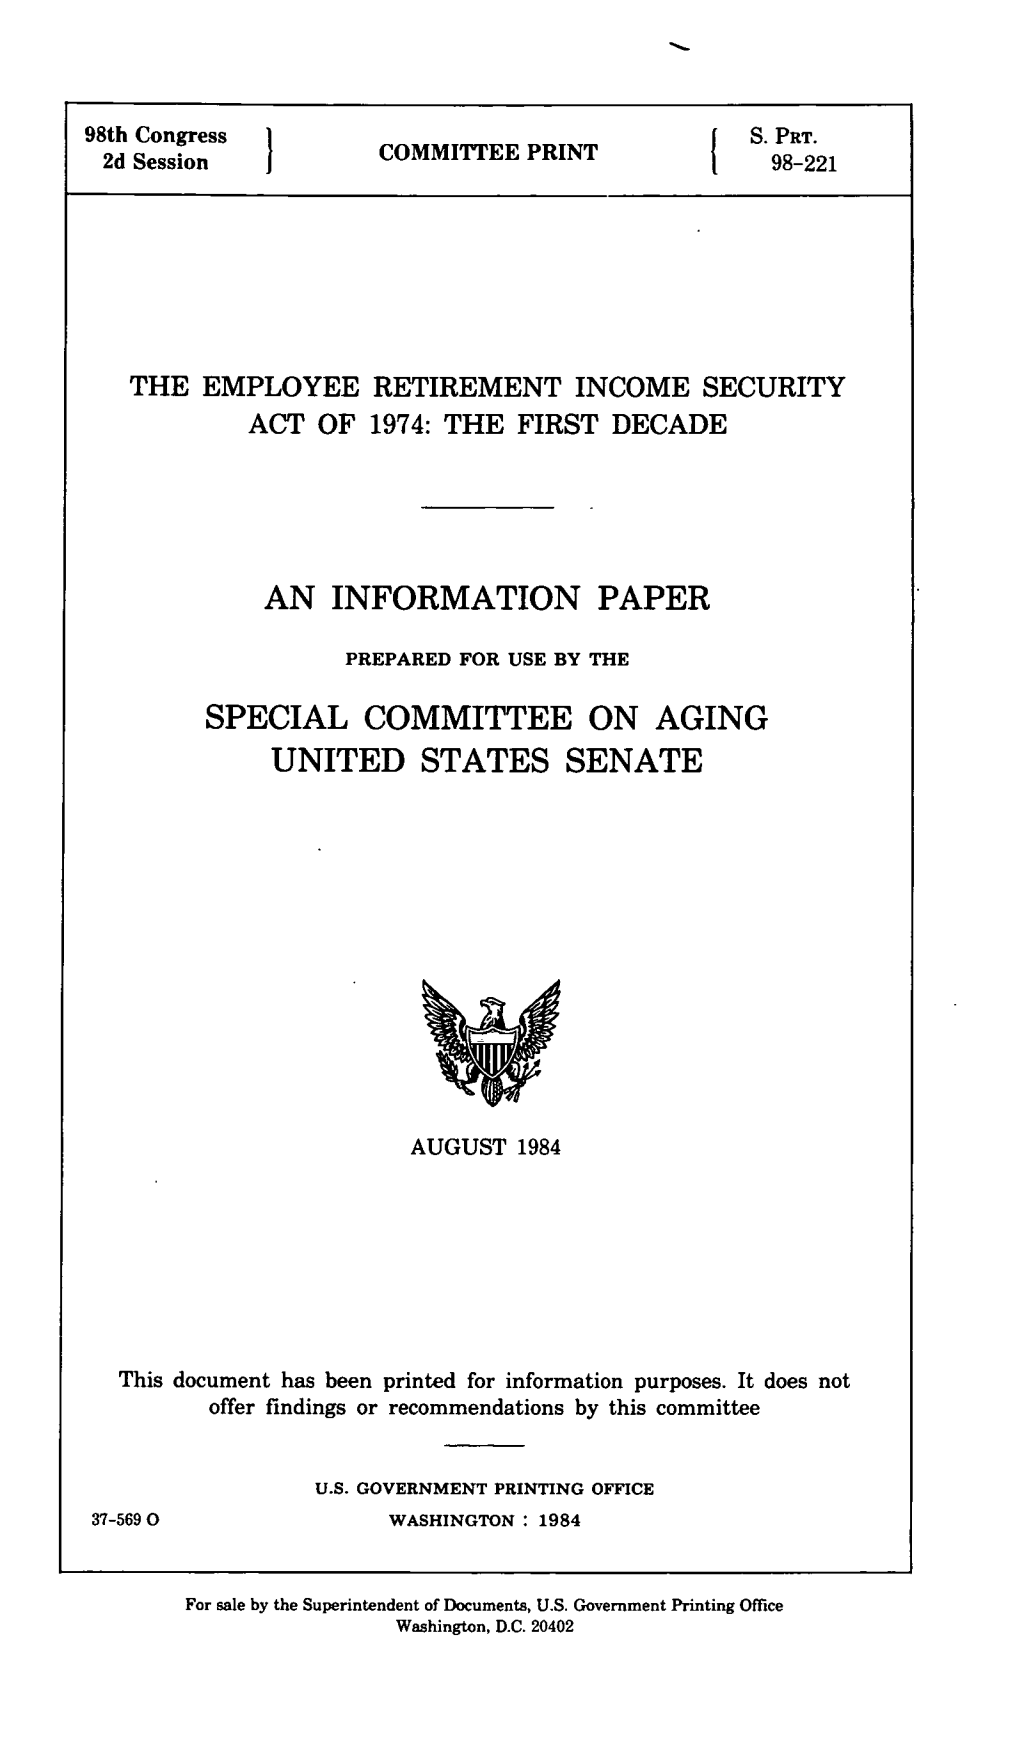 1984 Committee Report: the Employment Retirement Income